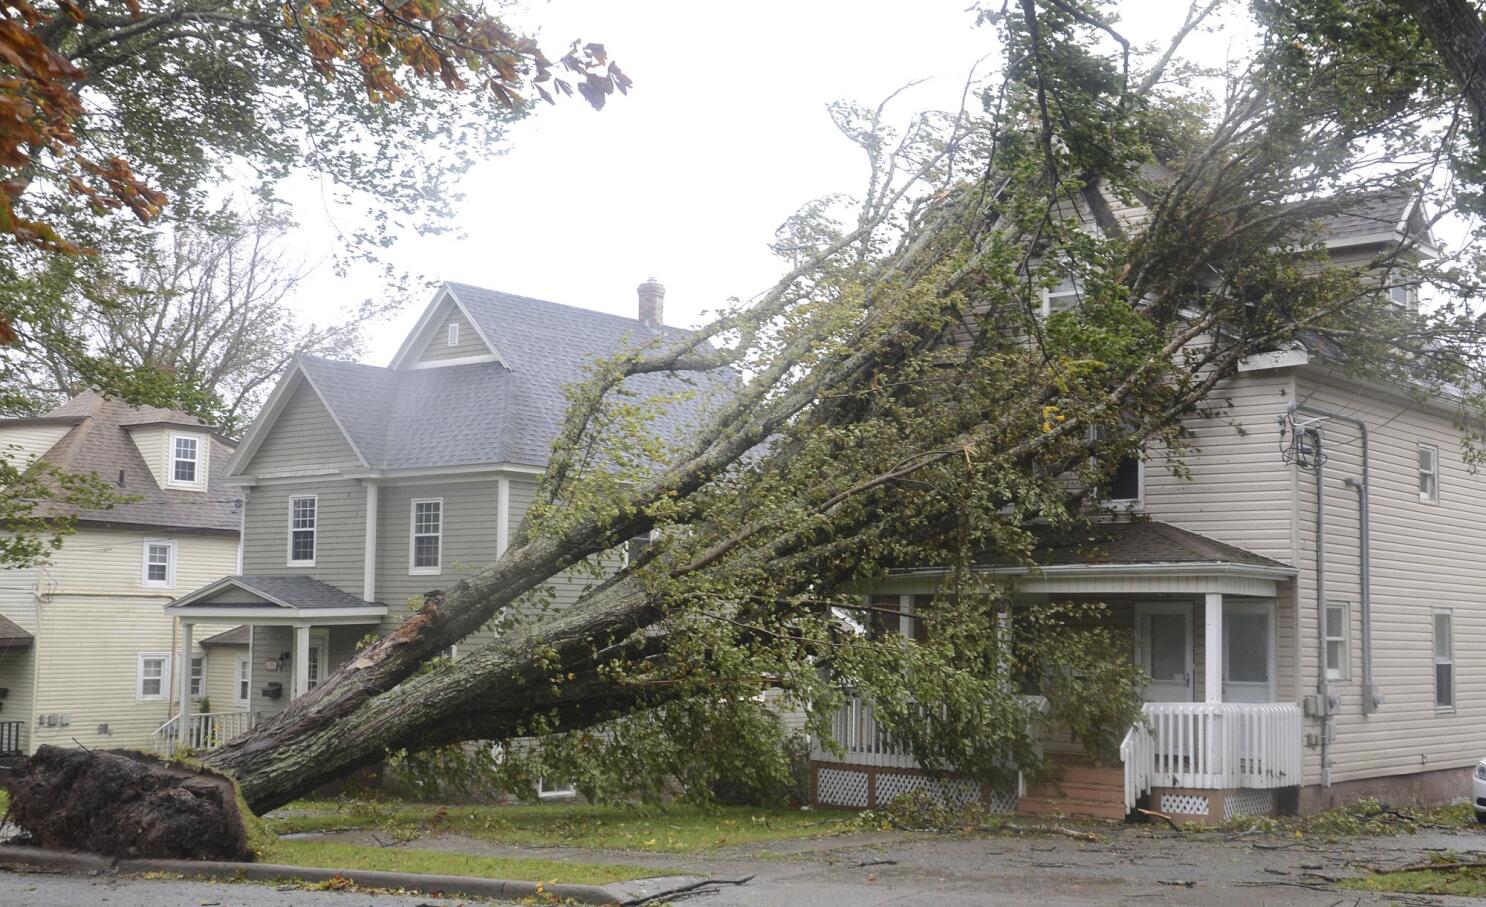 Fiona sweeps away houses, knocks out power in eastern Canada